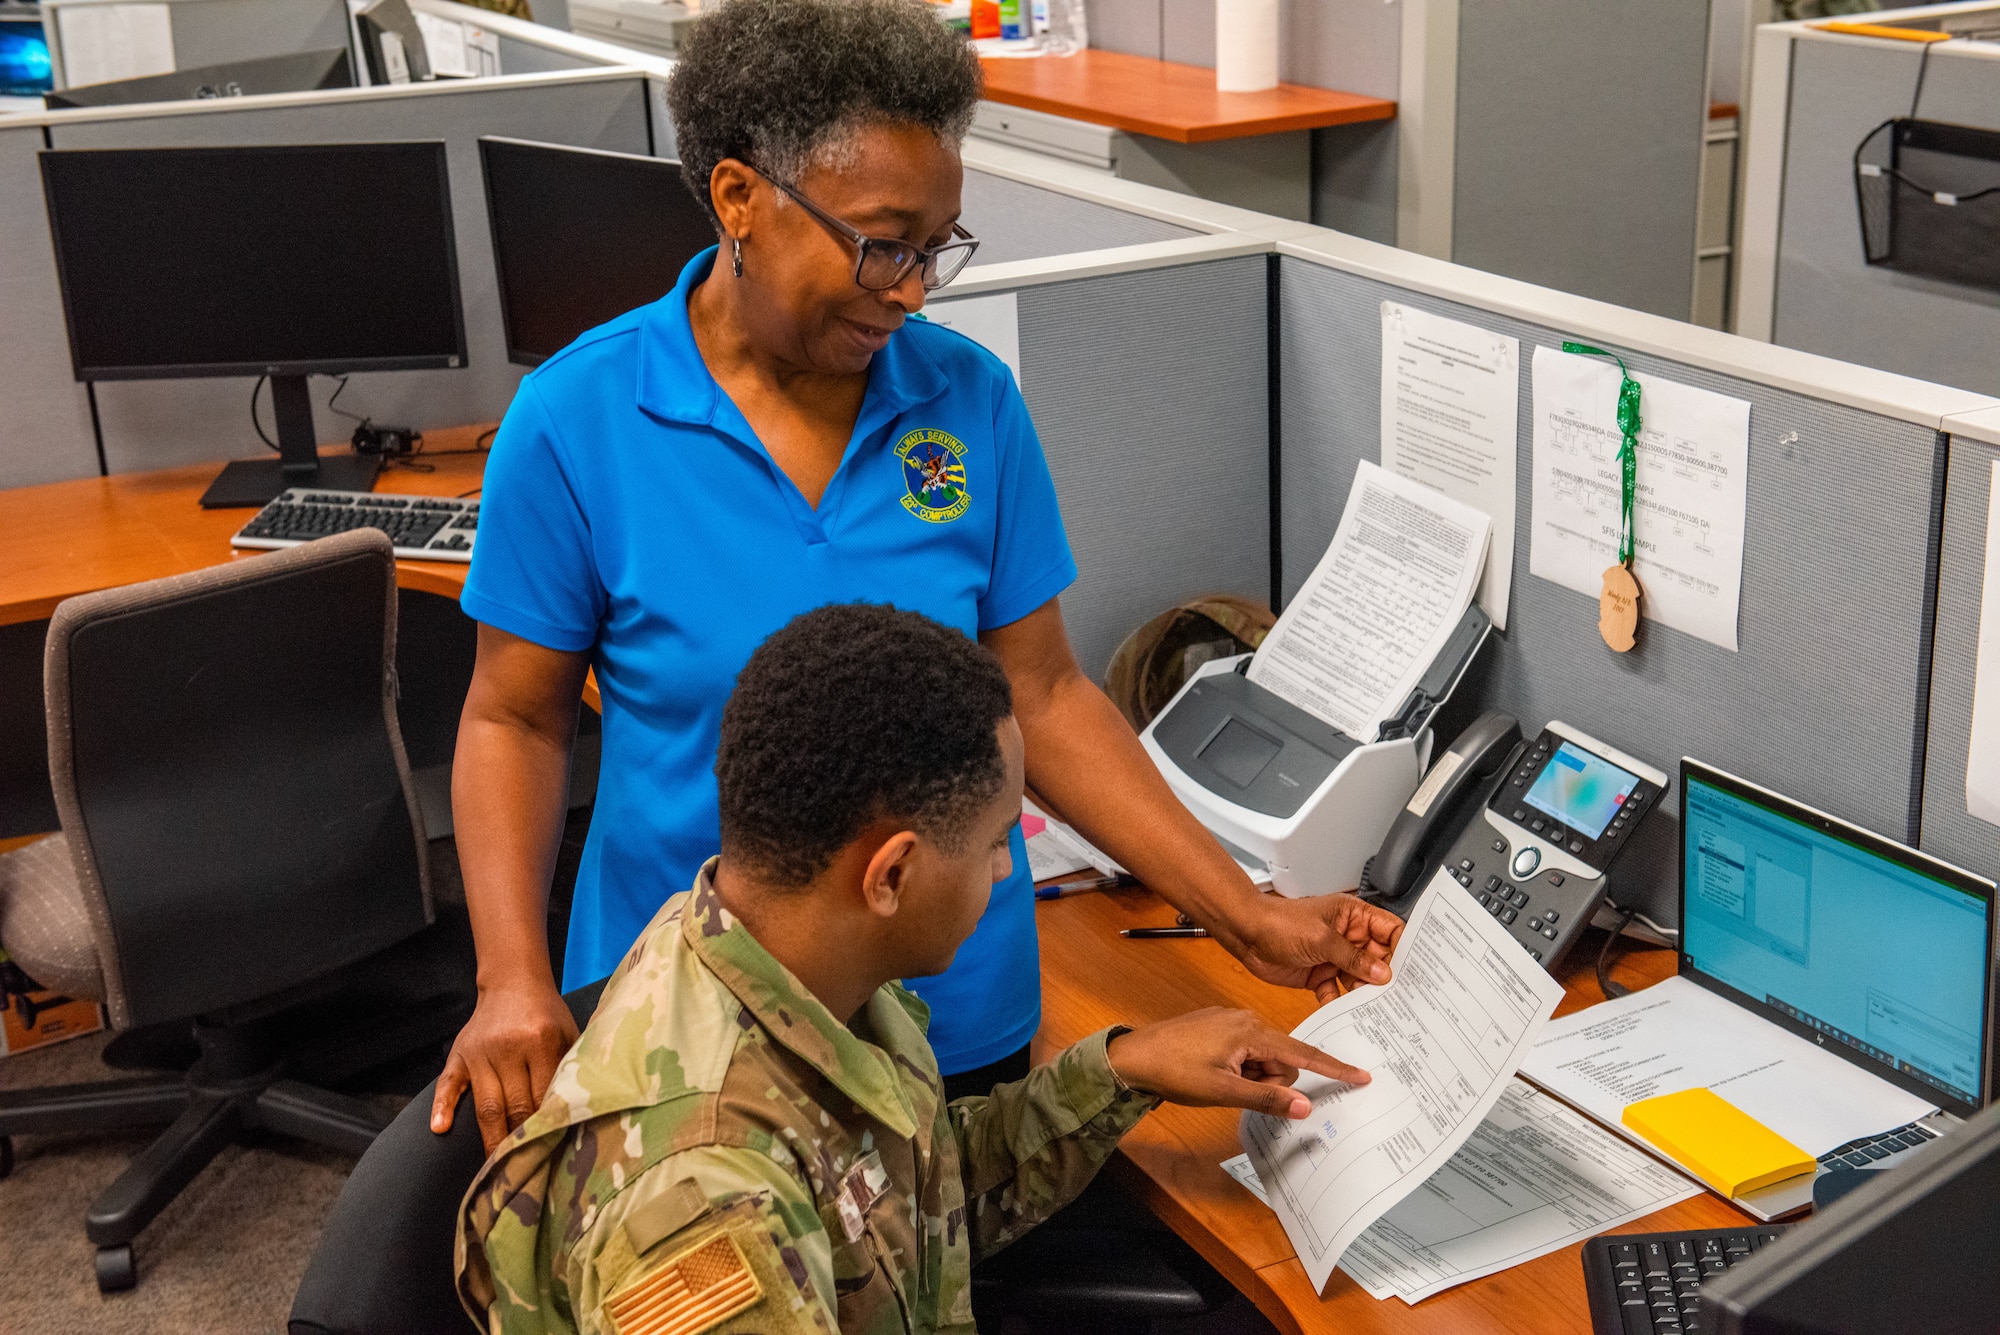 U.S. Air Force Senior Airman Miles Clark, 23rd Comptroller Squadron accounting technician, and Sheila Carter, 23rd CPTS budget analyst, review paperwork at Moody Air Force Base, Georgia, April 7, 2022. While maintaining the normal routine for 23rd wing operations, the CPTS team went outside its normal scope by developing a plan to make Lead-Wing readiness a reality. (U.S. Air Force photo by Airman 1st Class Courtney Sebastianelli)